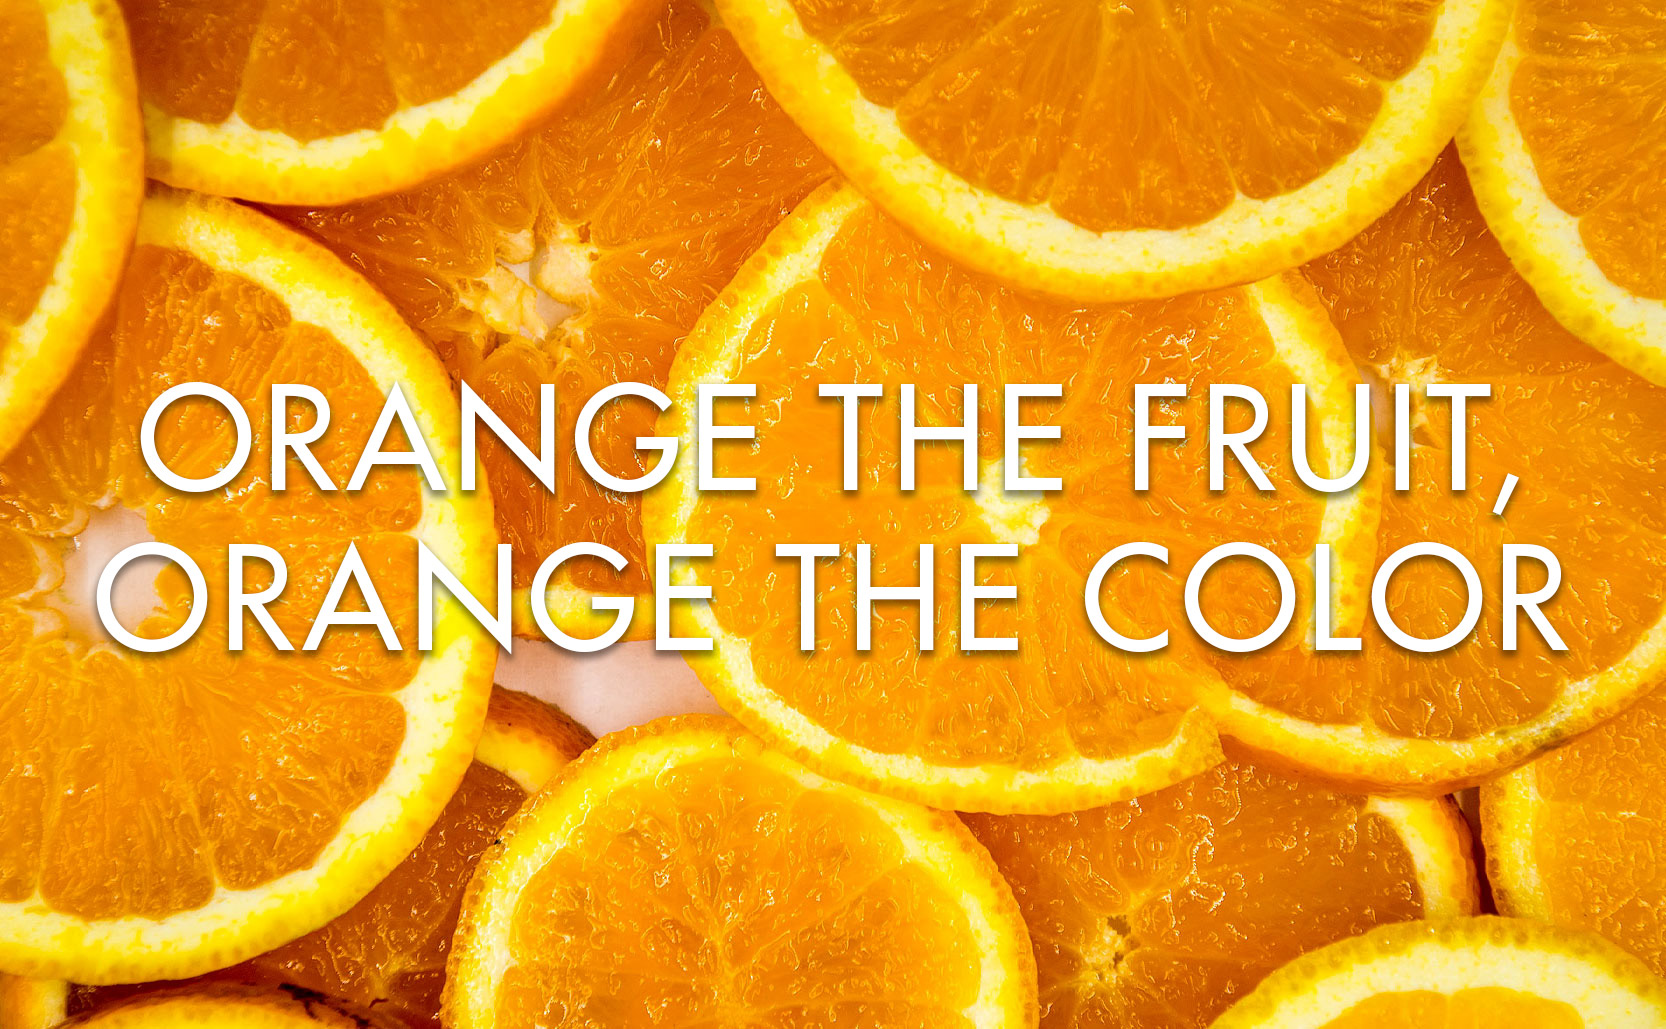 You are currently viewing Orange the fruit, orange the color